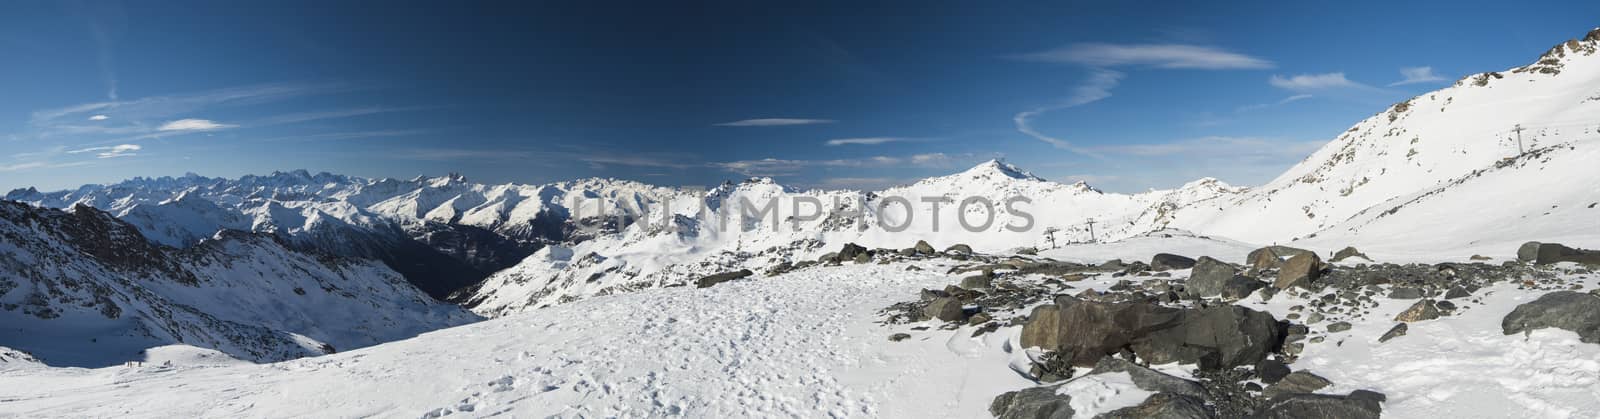 Panoramic view down snow covered valley in alpine mountain range on blue sky background with rock in foreground